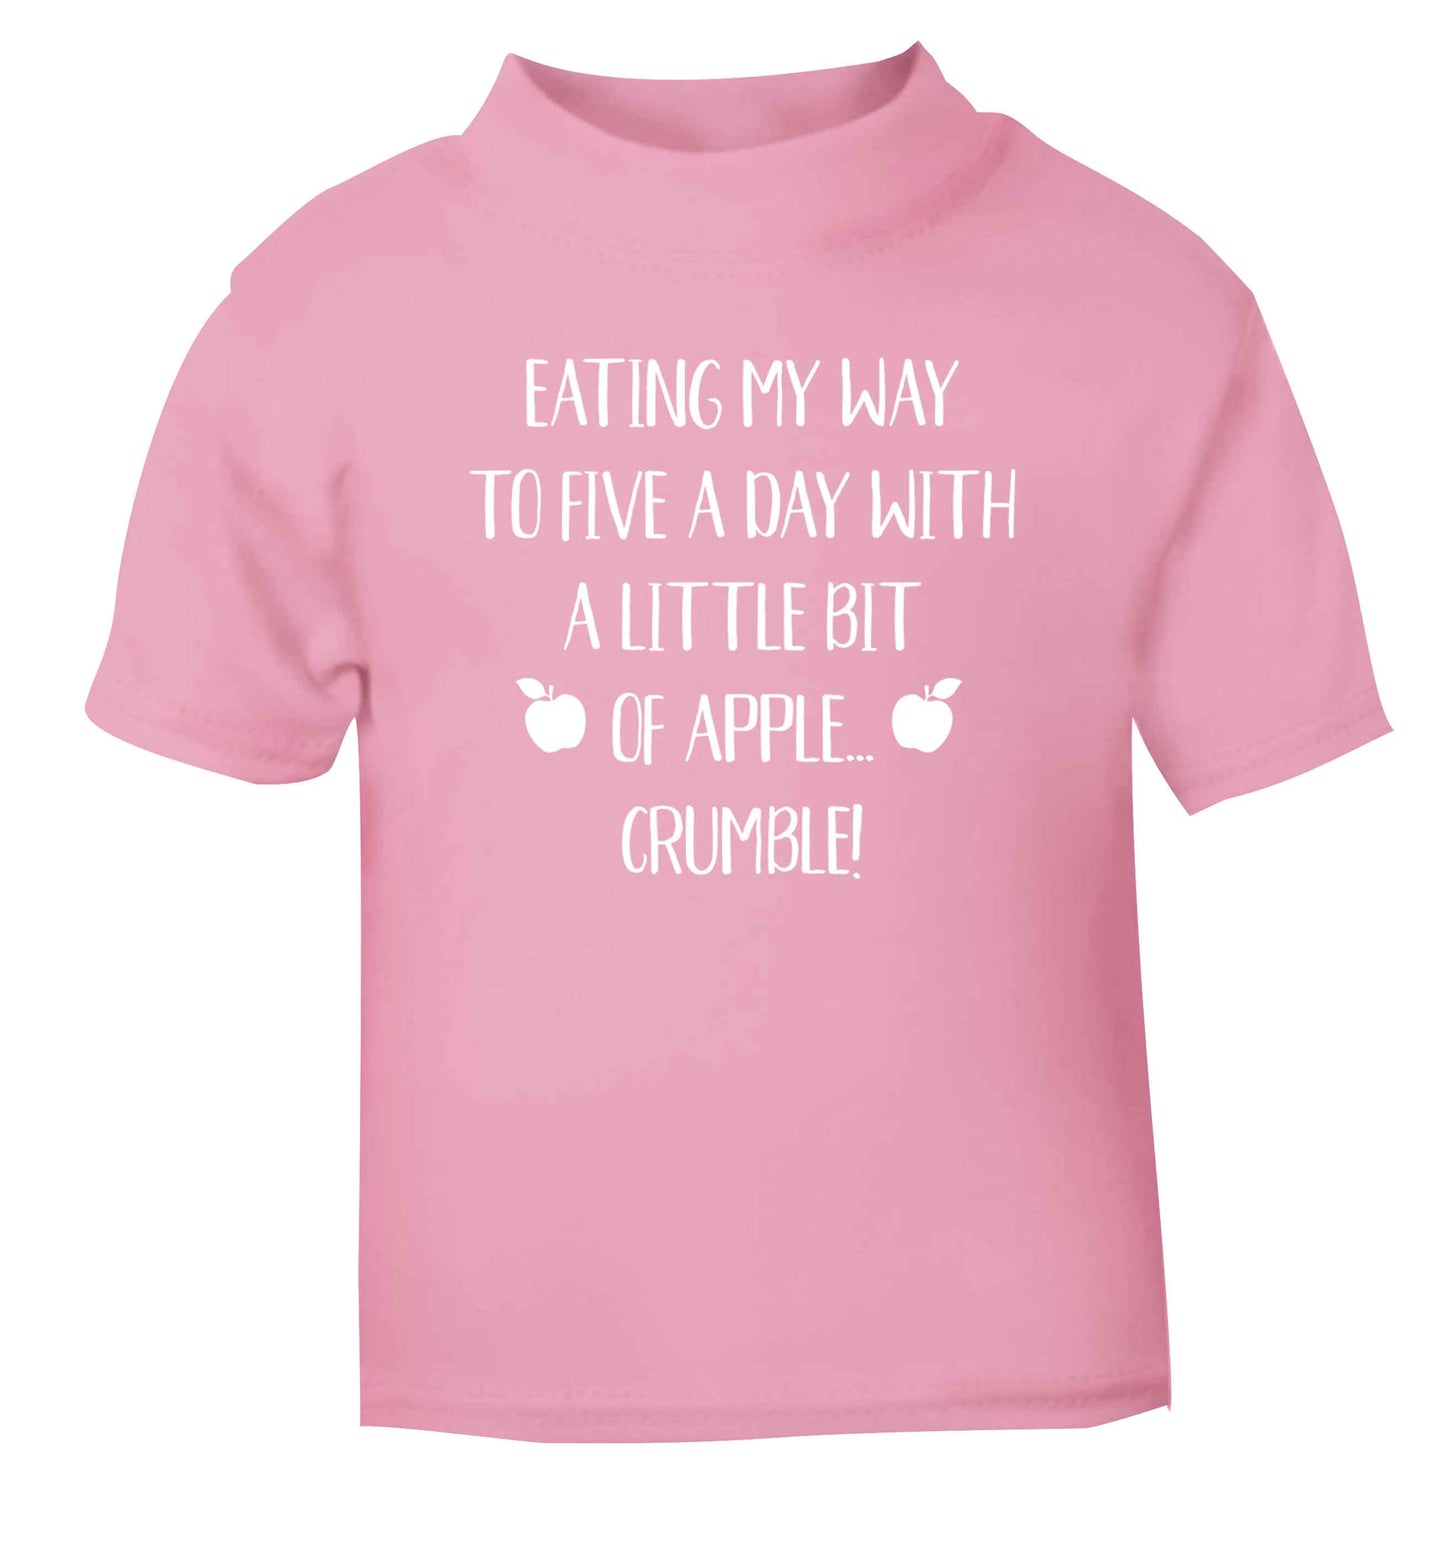 Eating my way to five a day with a little bit of apple crumble light pink Baby Toddler Tshirt 2 Years